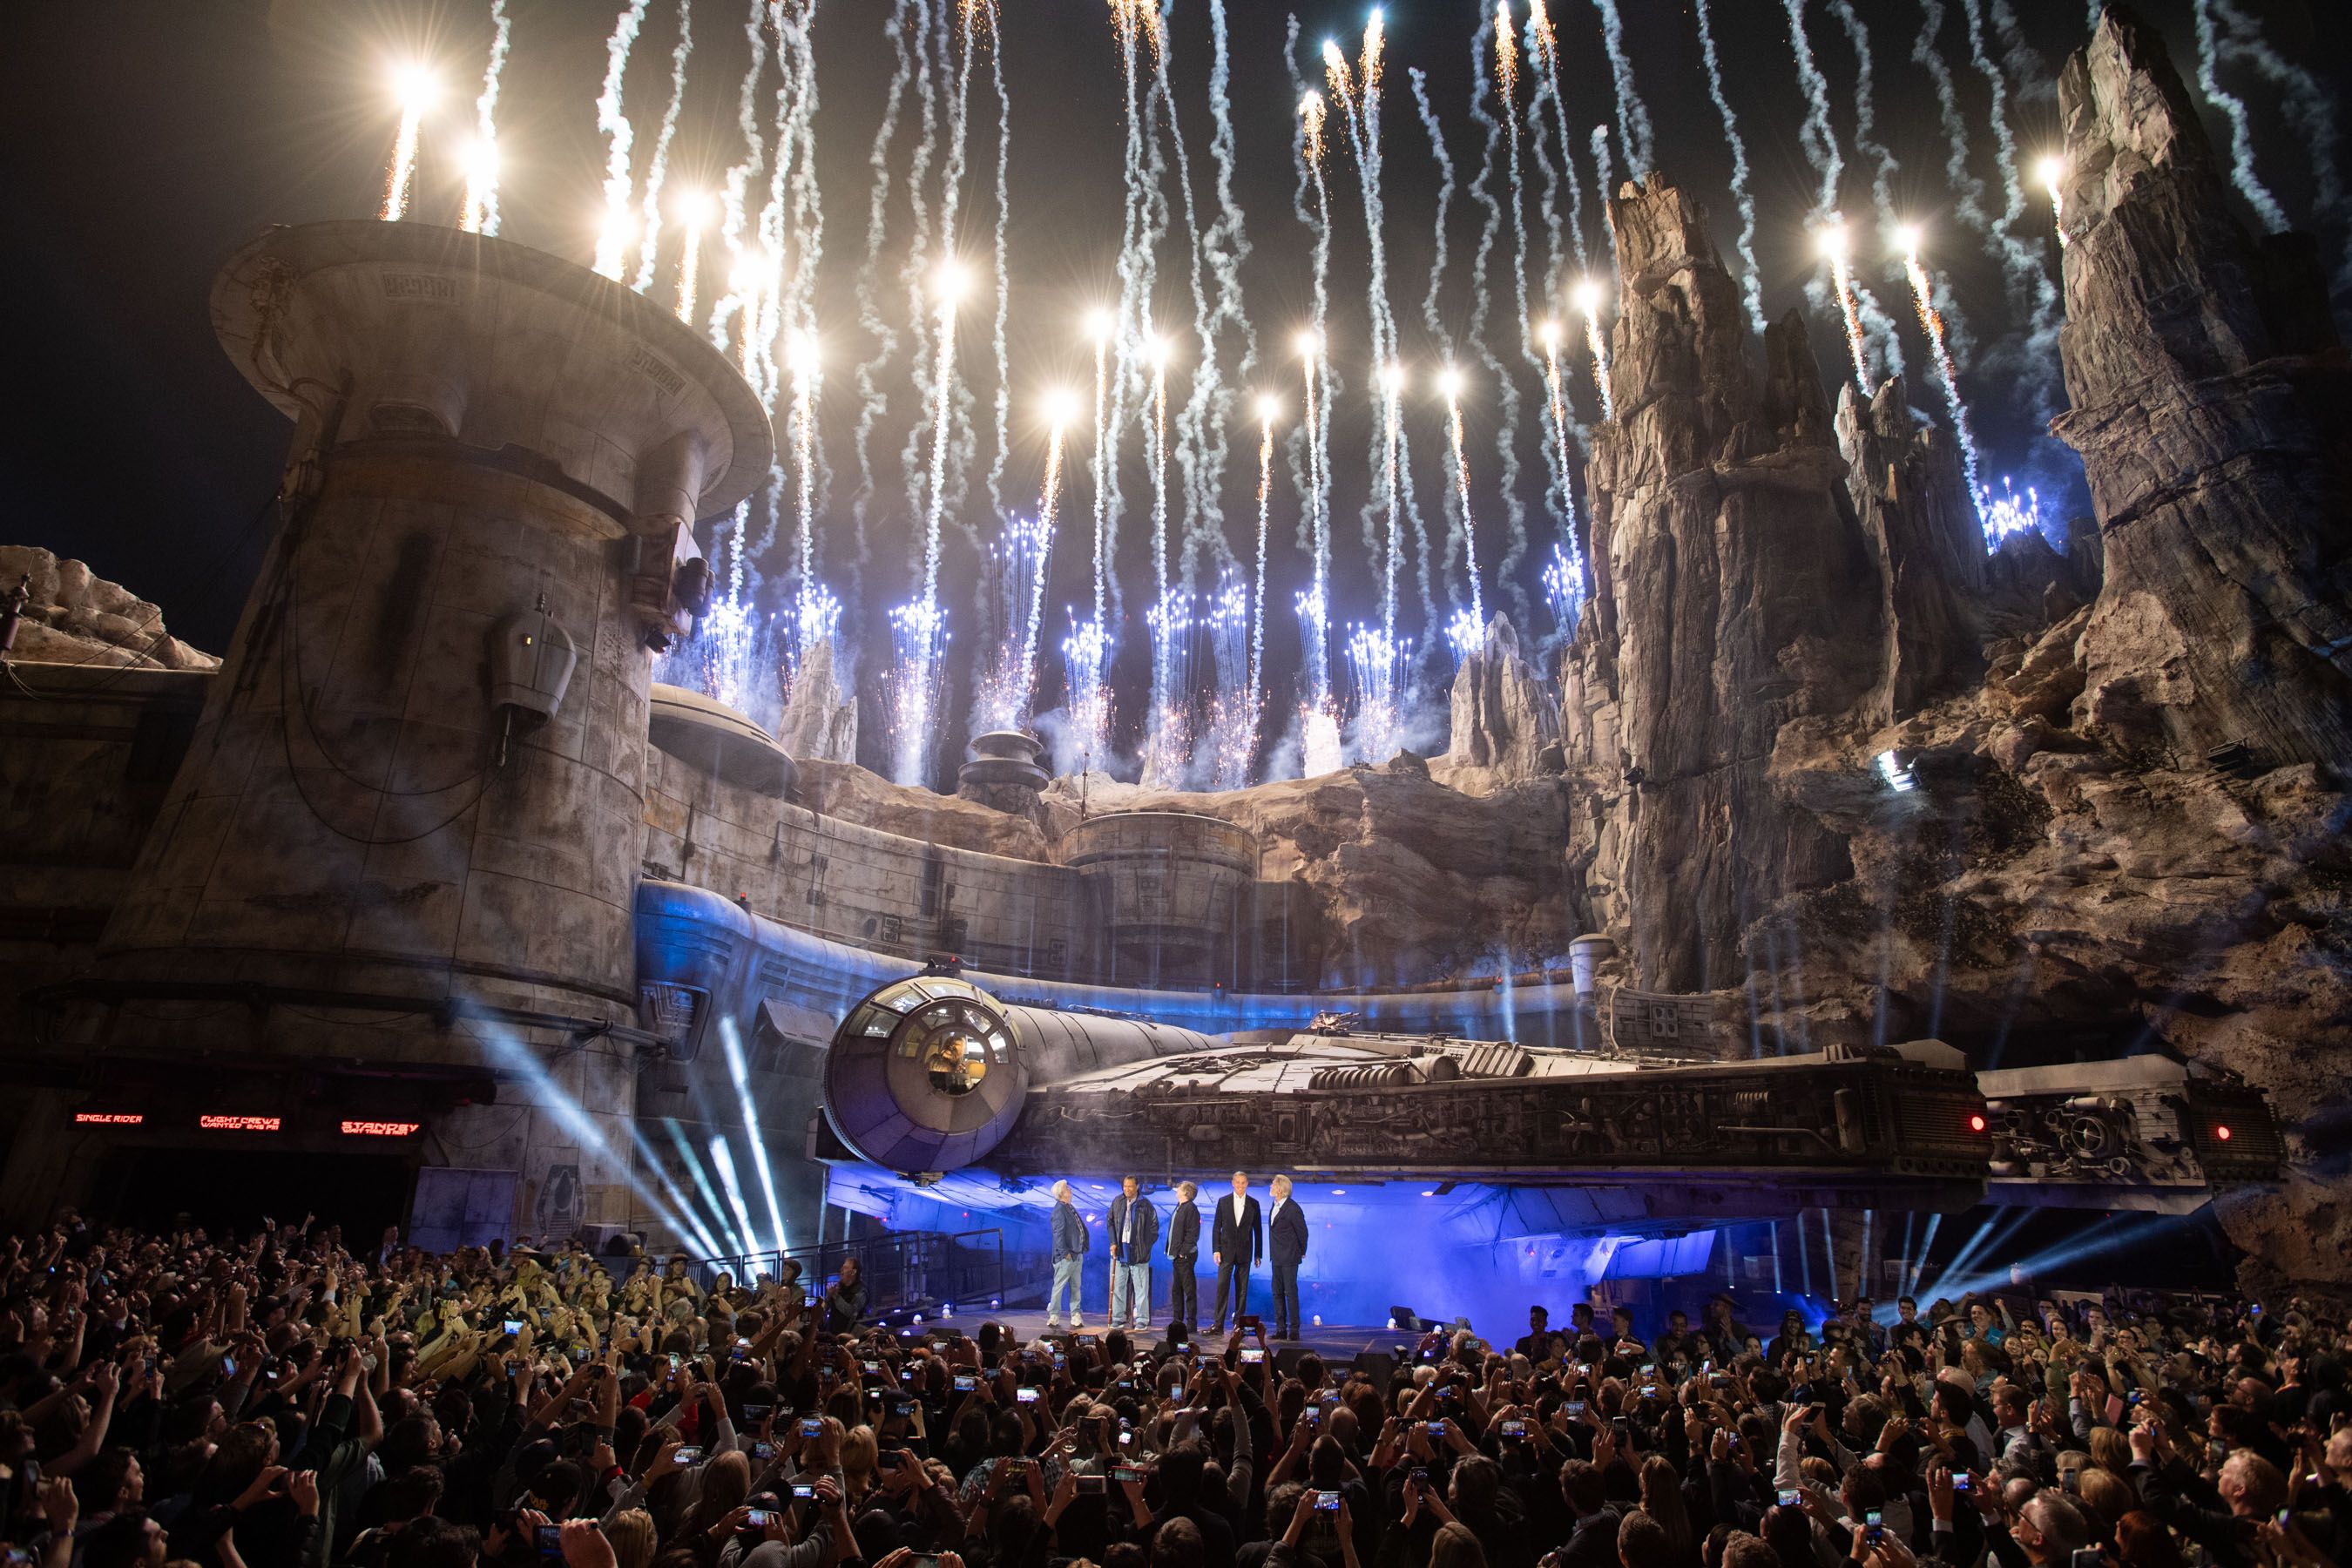 Star Wars: Galaxy’s Edge Celebrated Ahead of Opening at Disneyland Park